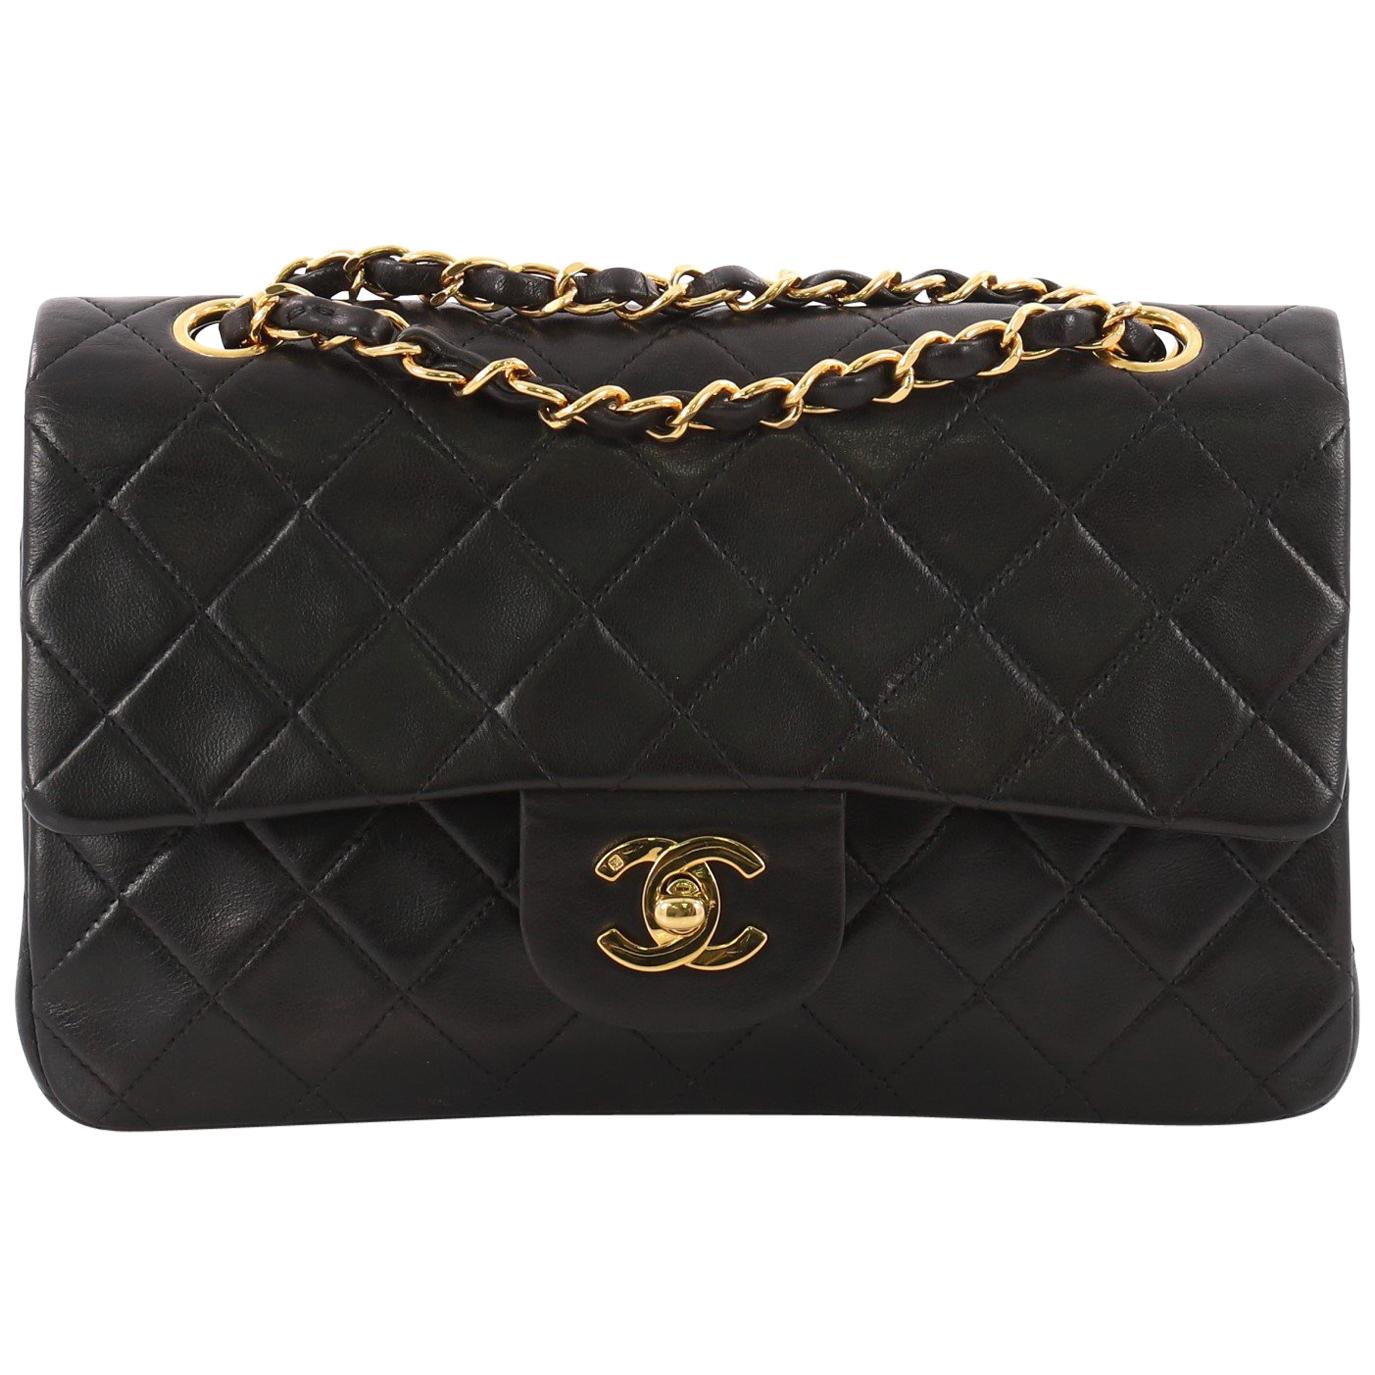 Chanel Vintage Classic Double Flap Bag Quilted Lambskin Small 